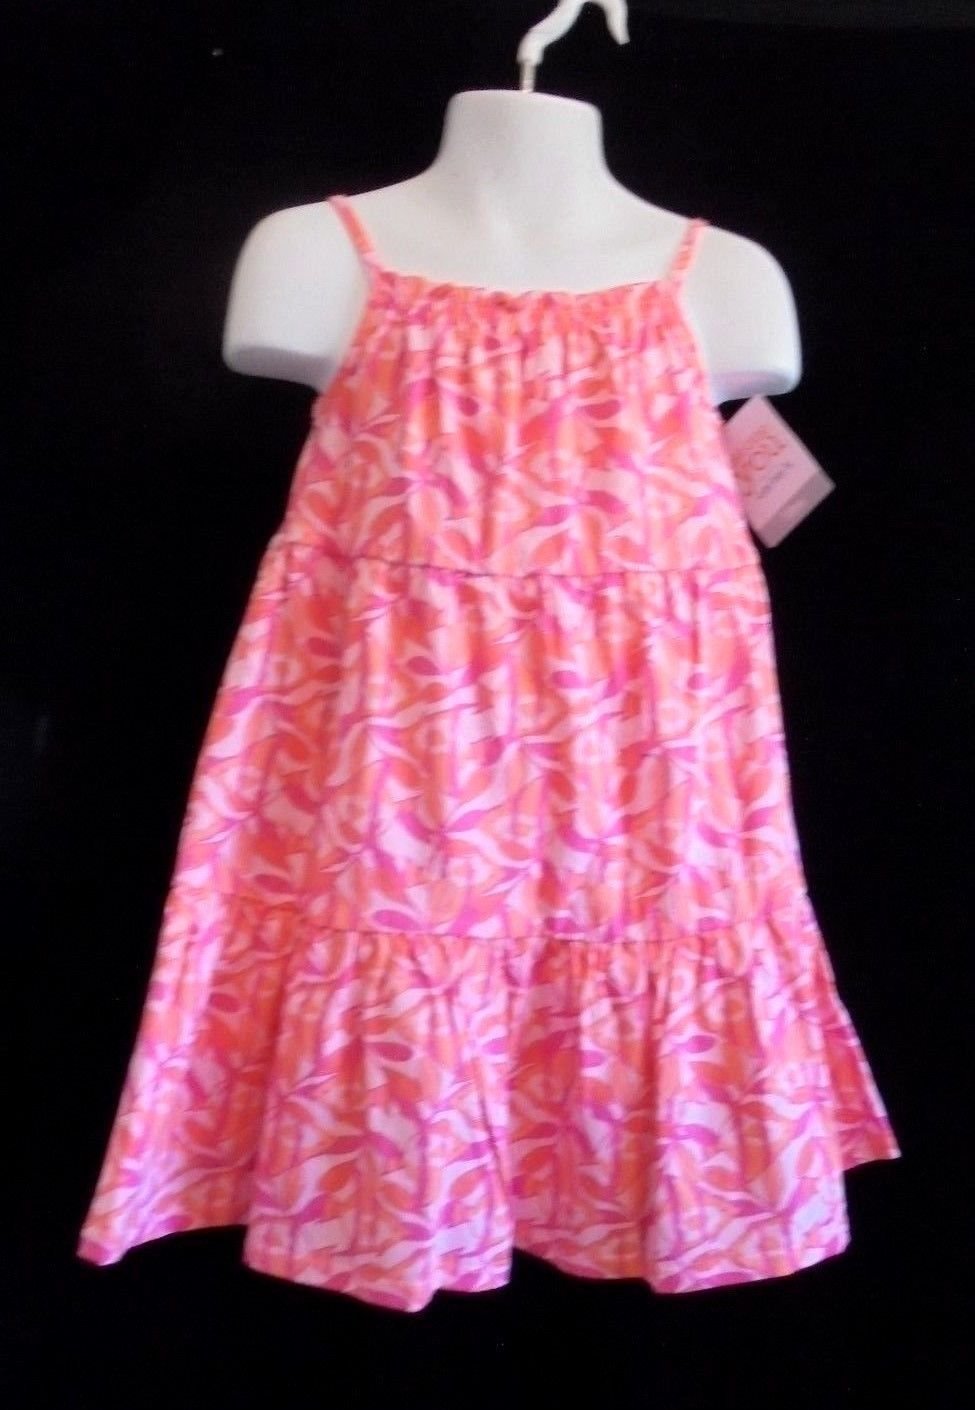 Carters Just One You - NWT Toddler Girls Spring Pink/Orange Dress size 18M